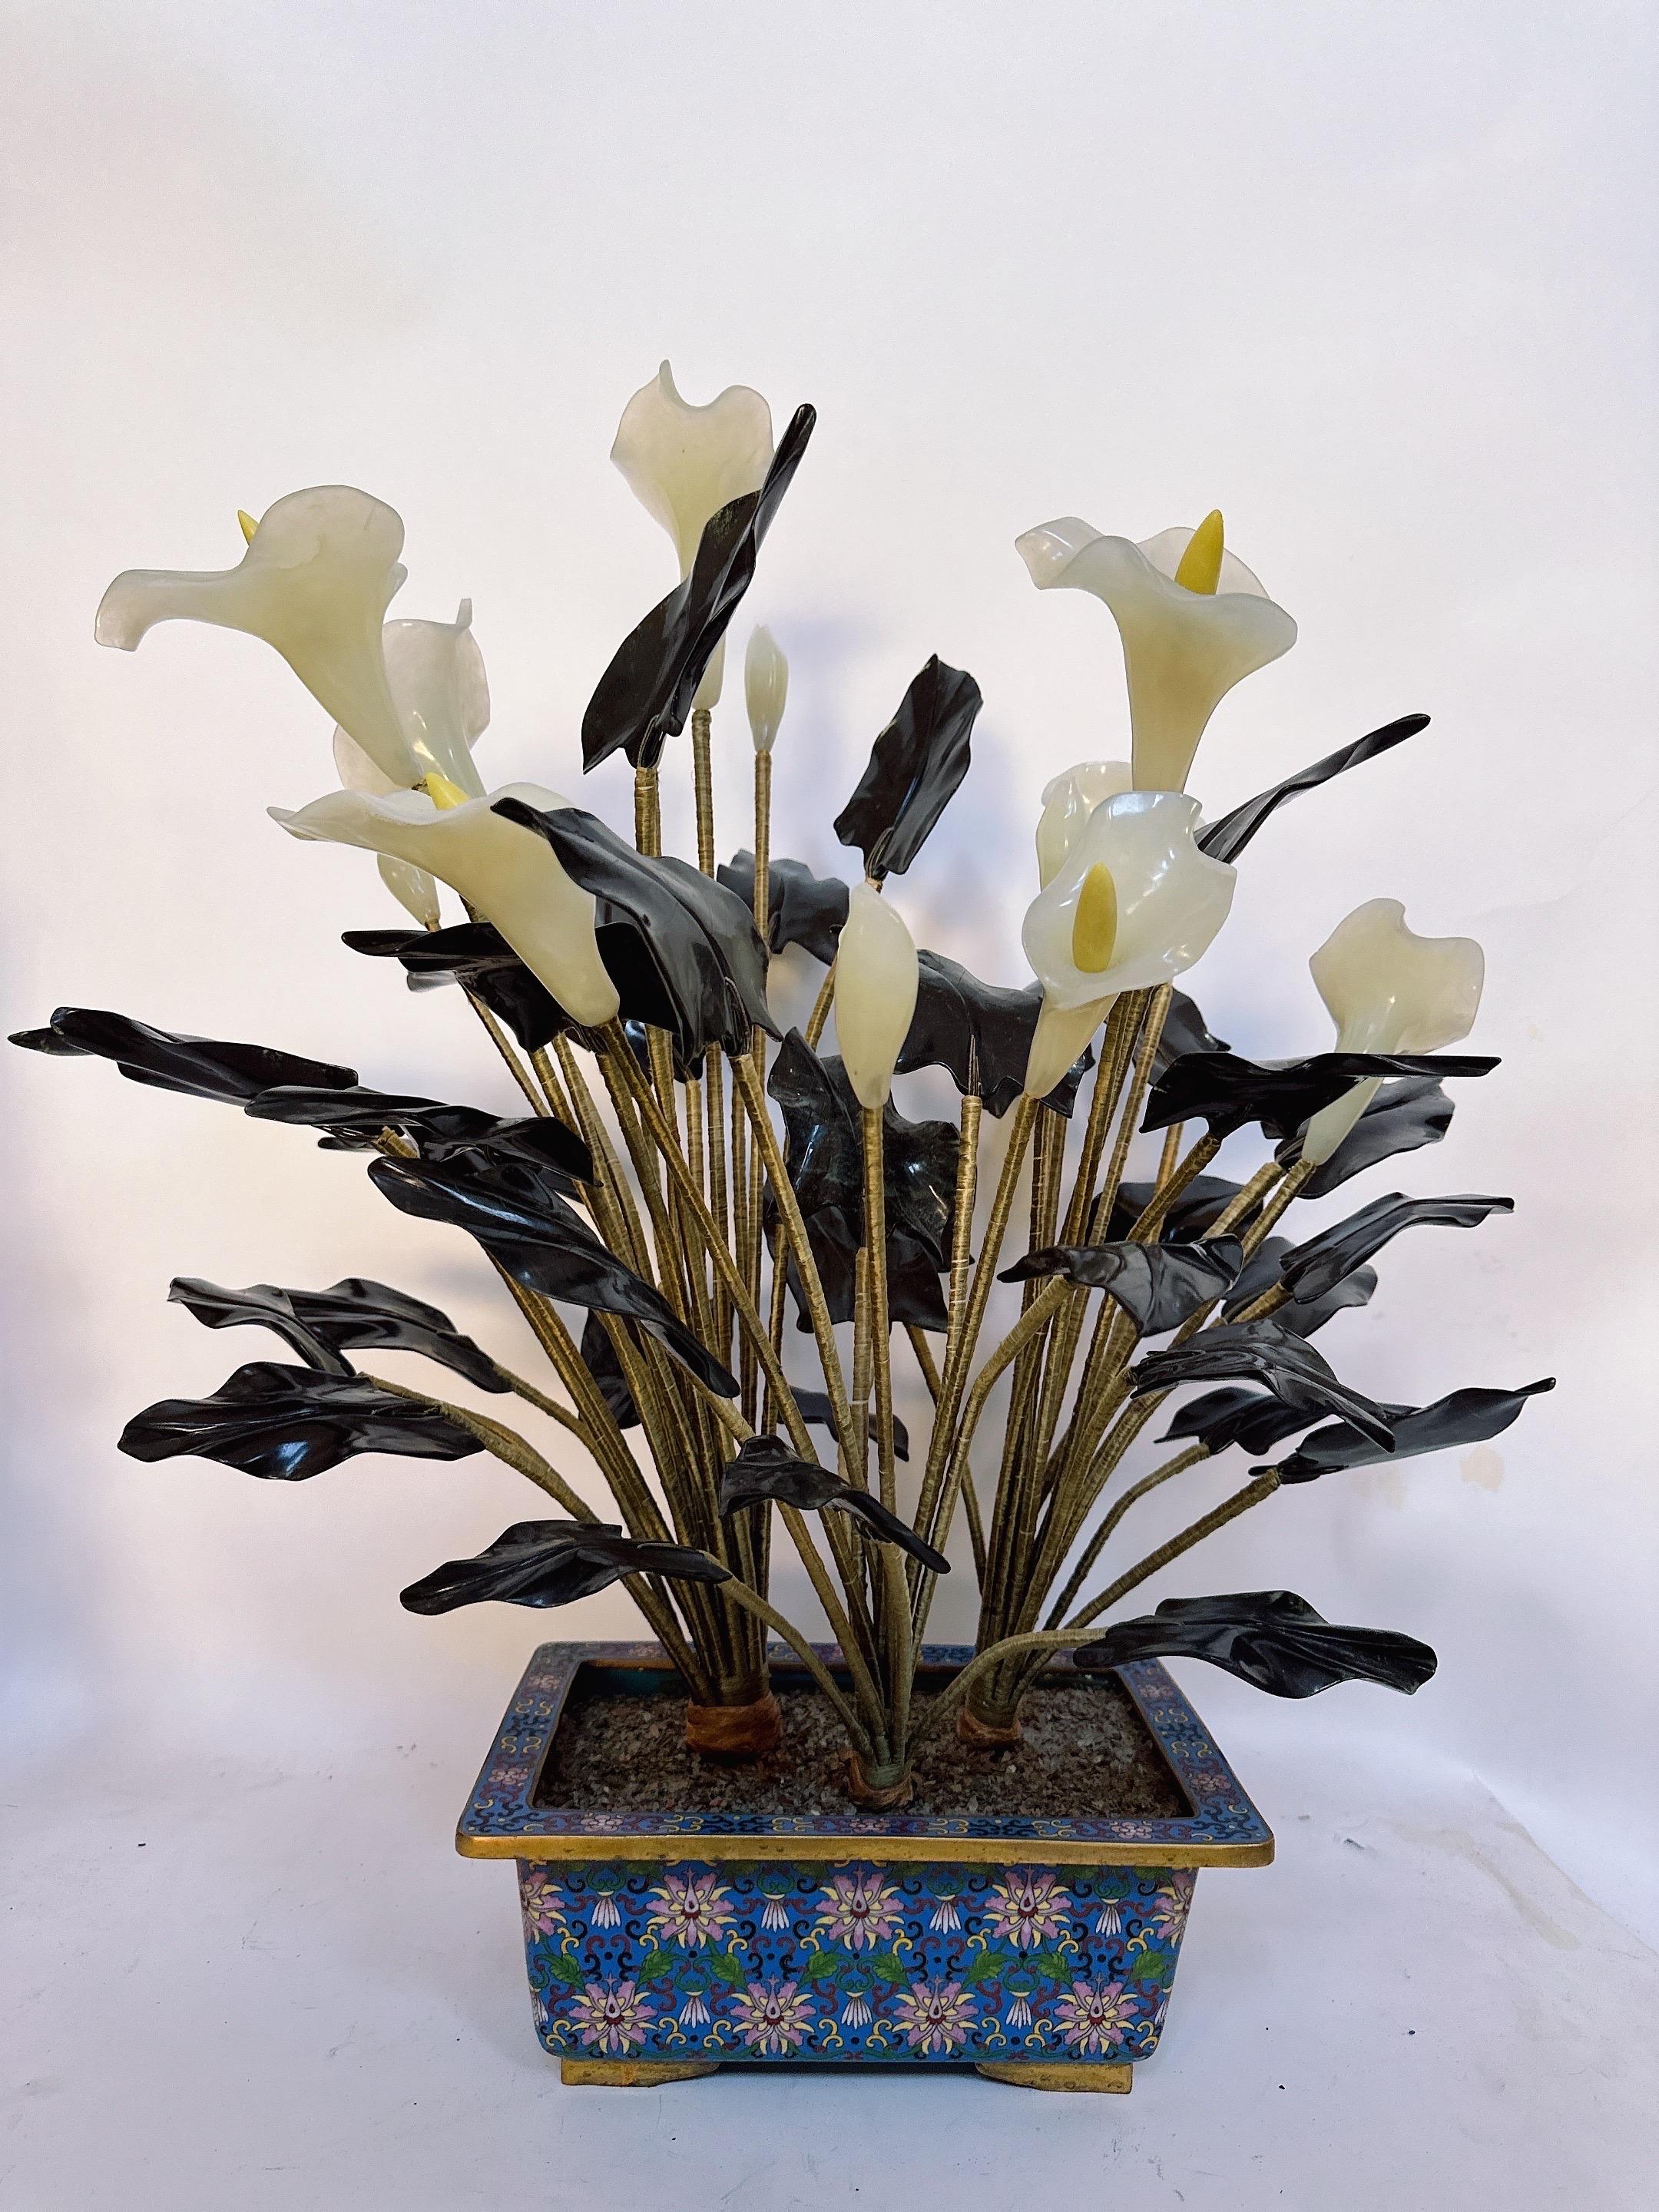 A unique 25'' Chinese Jade floral tree composed of metal bending arms supporting spinach green Jade leafs and White Jade Alocasia flowers, sits inside a beautifully decorated gilt cloisonne blue lotus flower motif planter.
 Circa: late 19th to